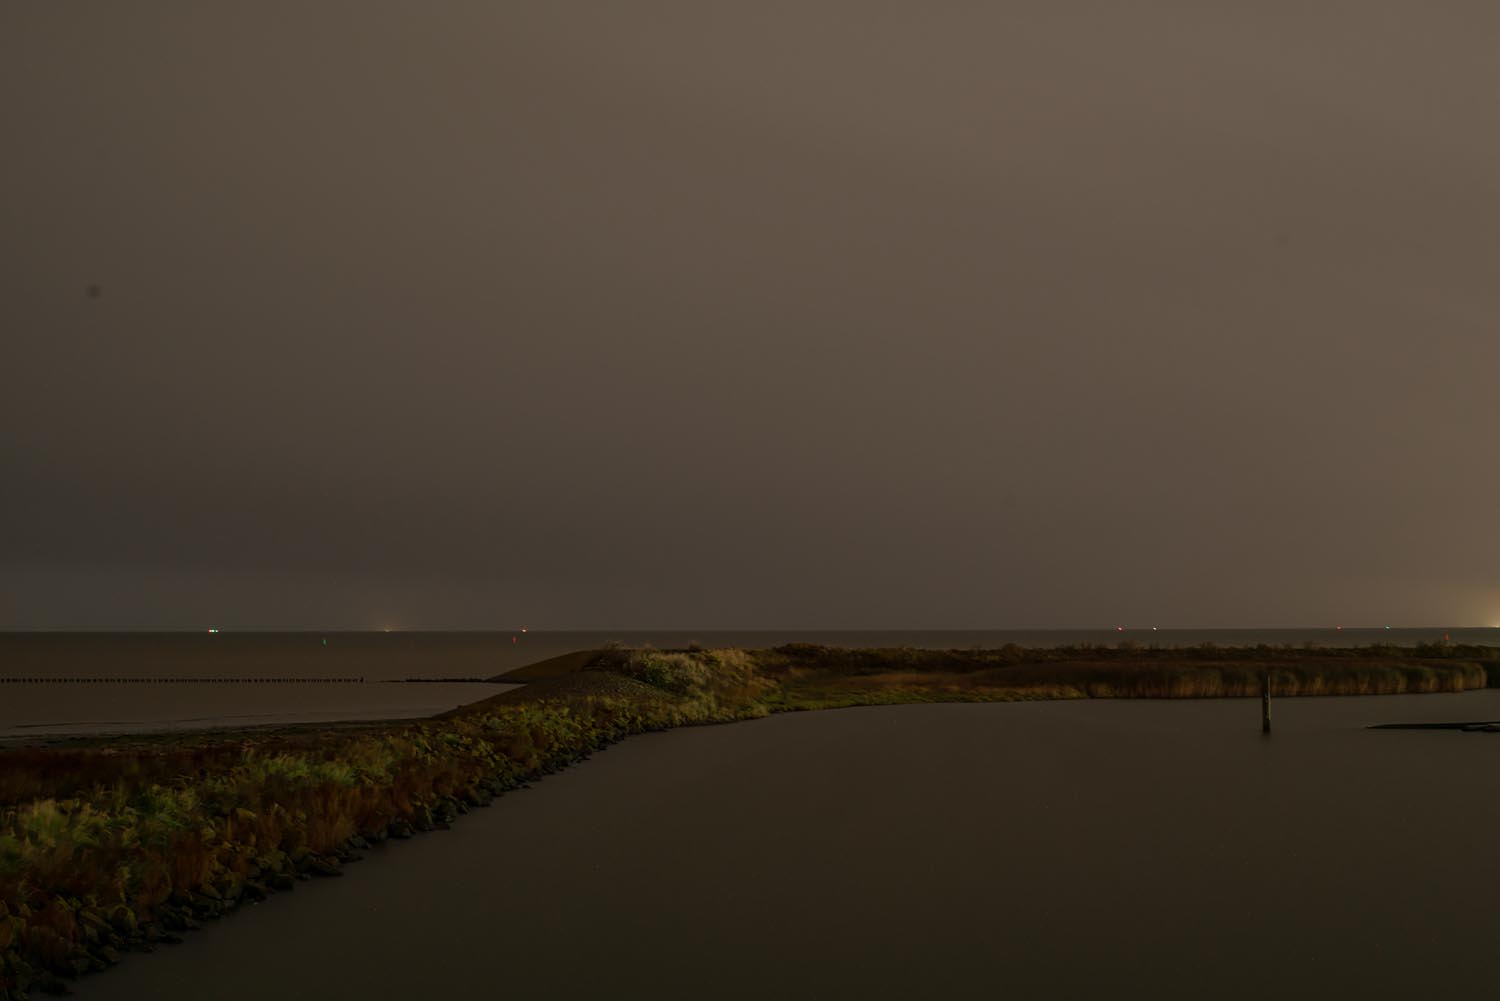 Sites at Risk of Climate Change: Night Landscape Photographs in The Netherlands, Steve Giovinco, North Holland with Small Glowing Lights in the Distance